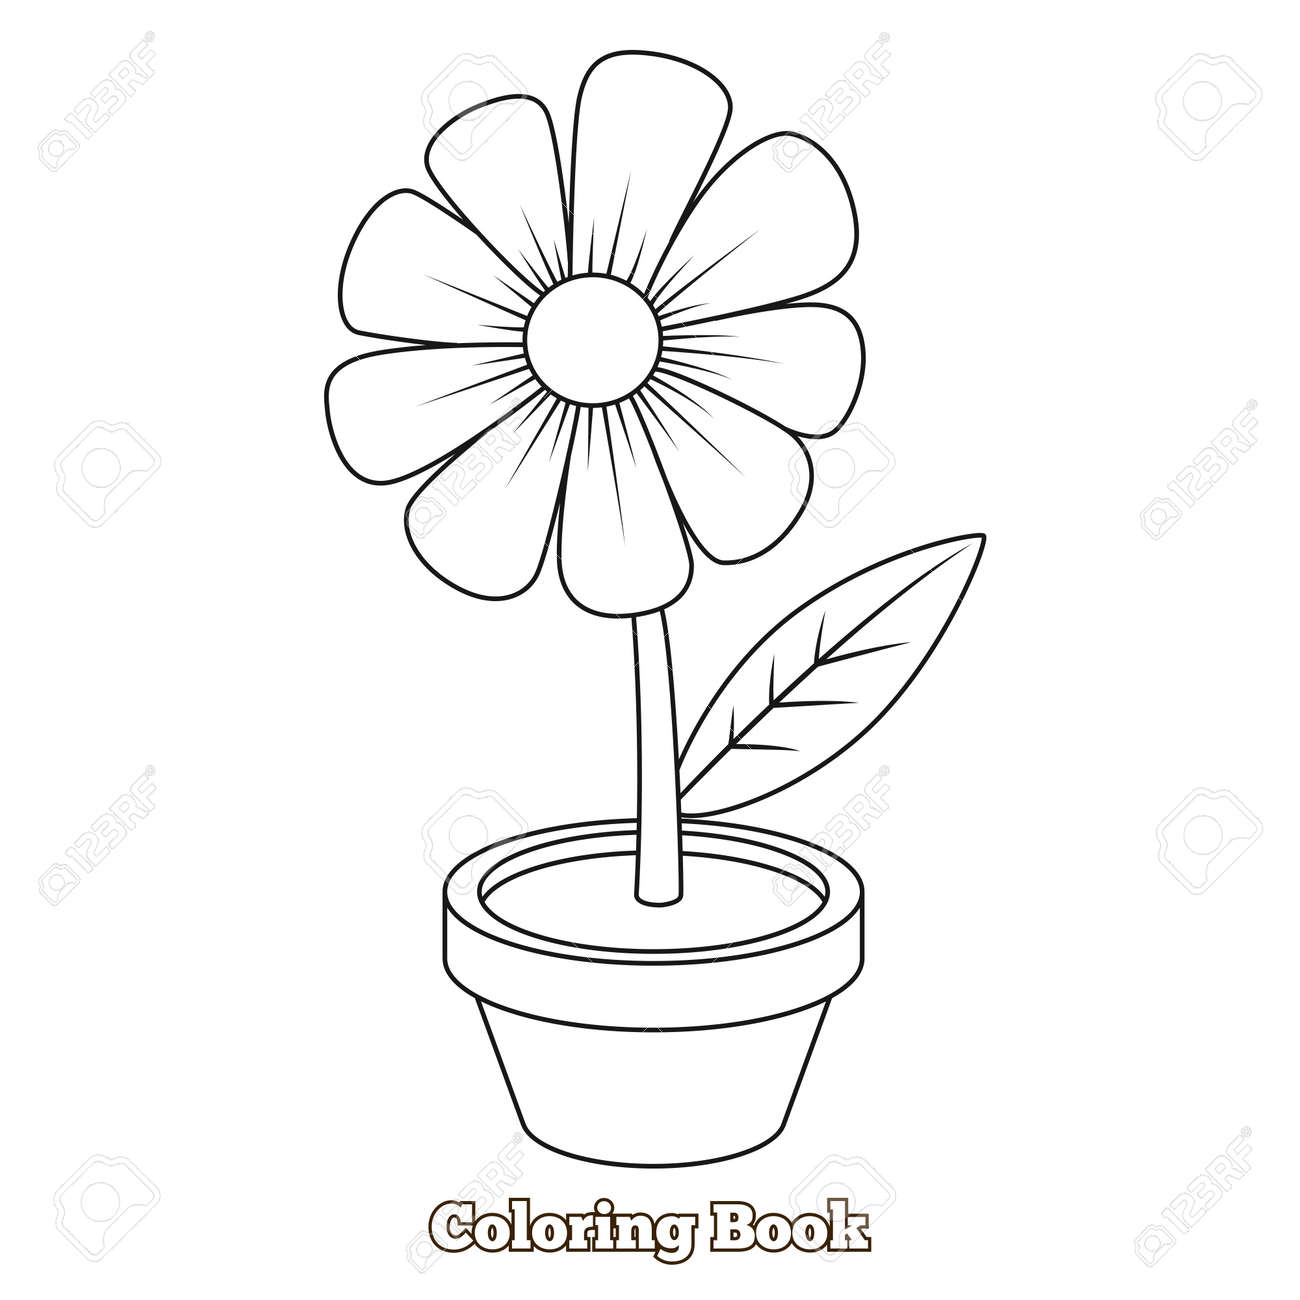 Flower cartoon coloring book educational game vector illustration royalty free svg cliparts vectors and stock illustration image